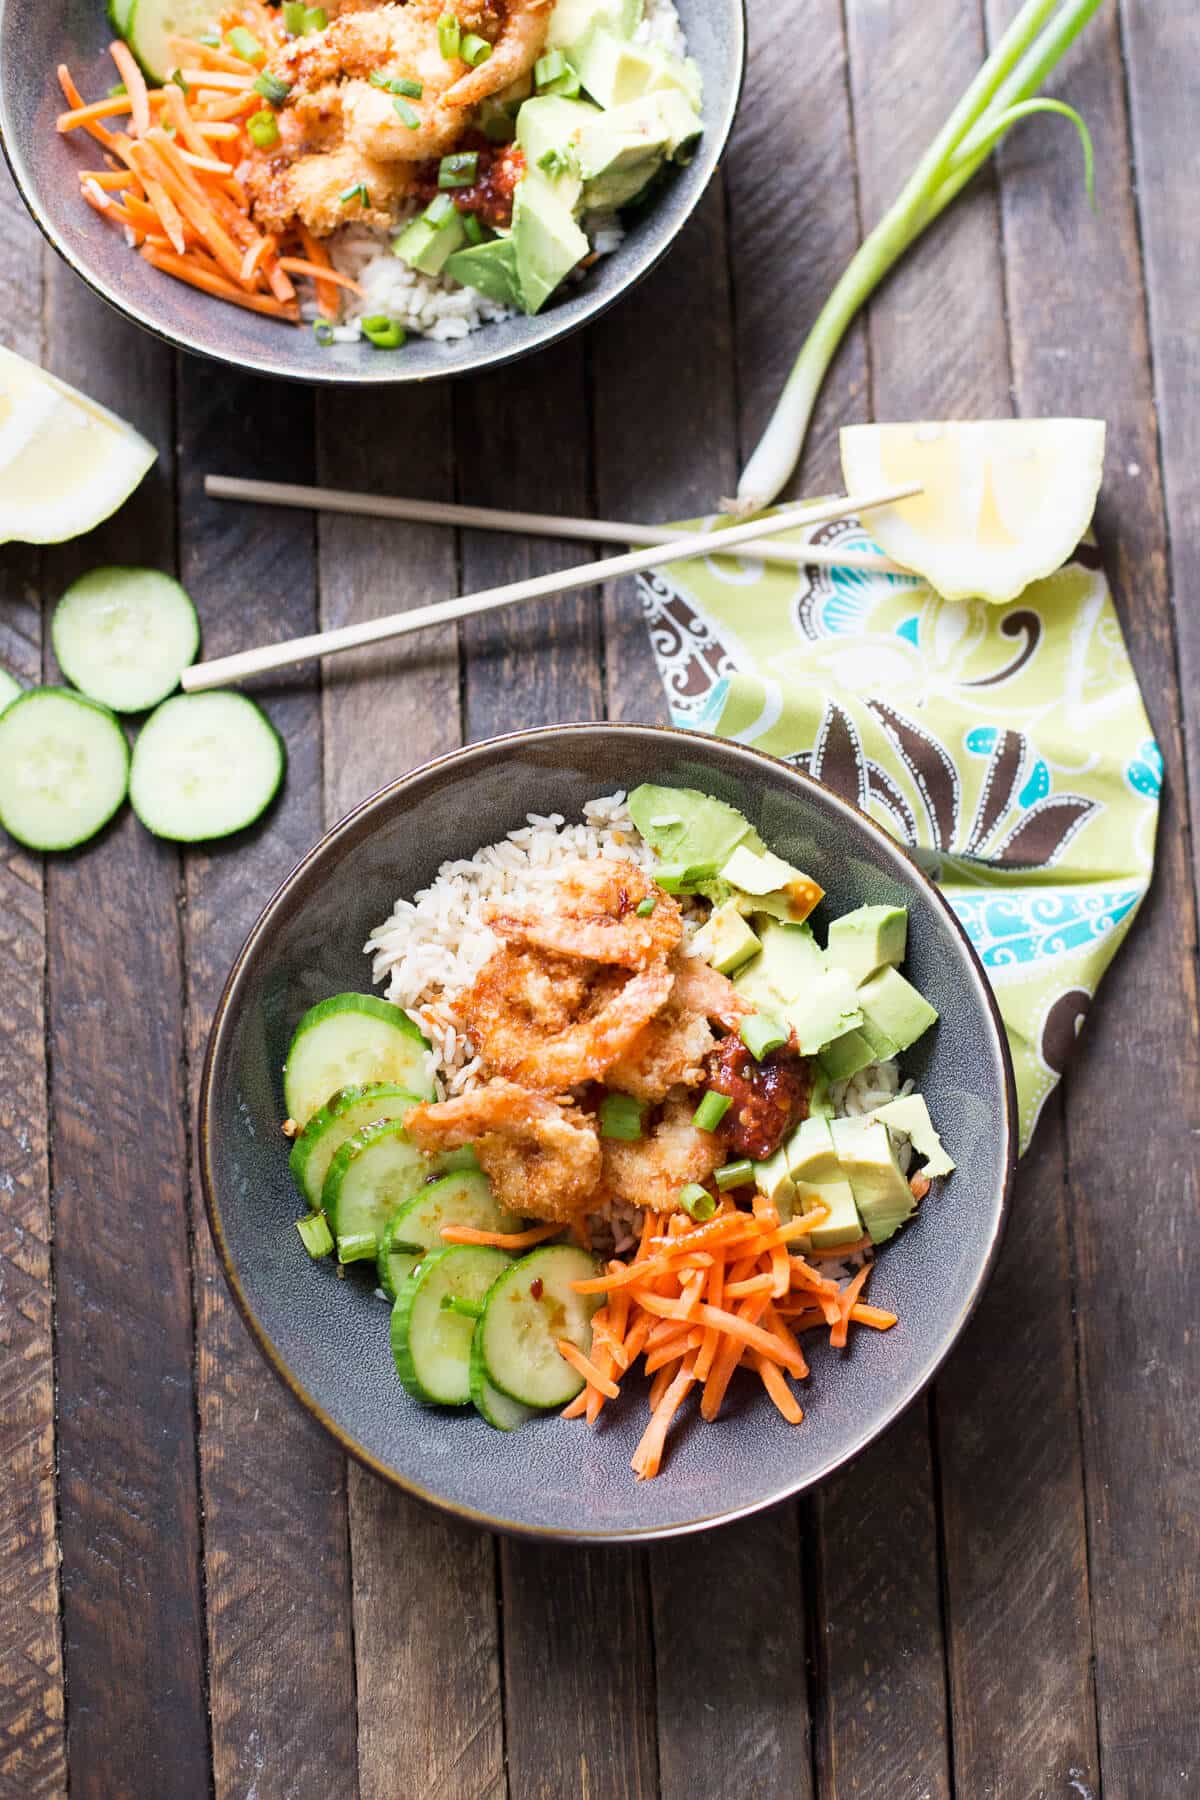 Breaded shrimp, veggies and a spicy sweet sauce make this sushi bowl absolutely delicious!